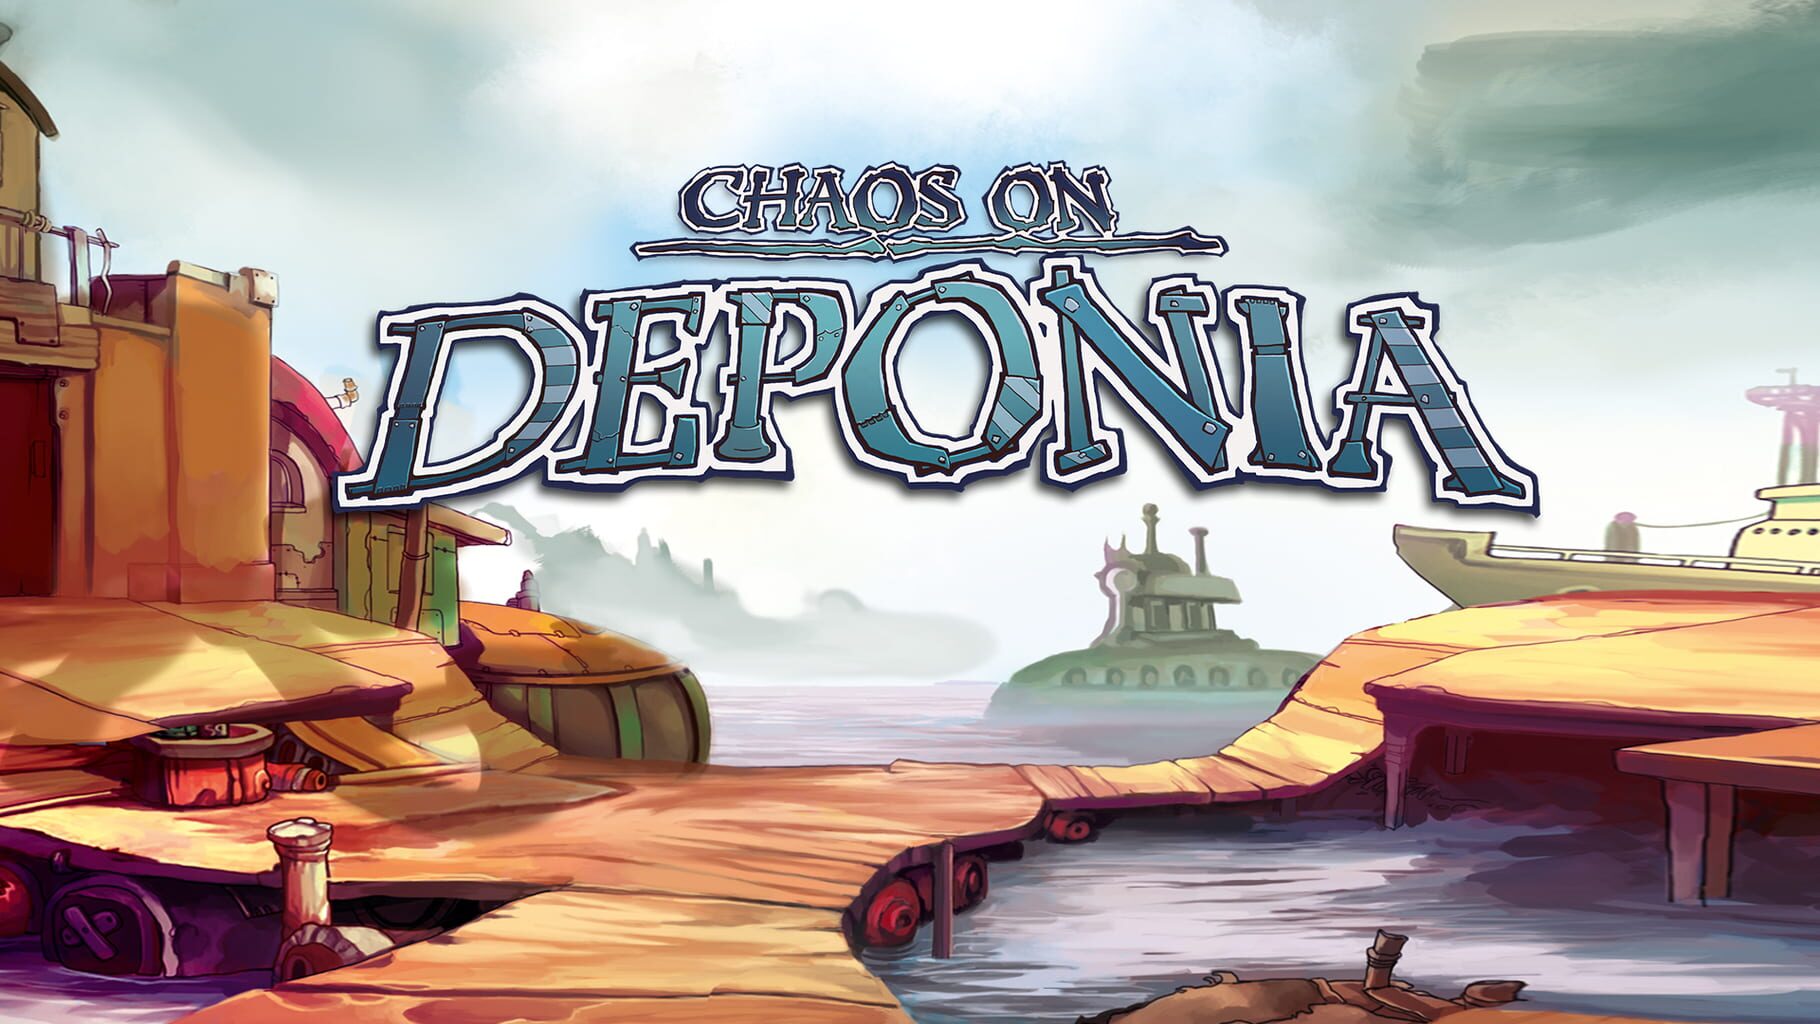 Chaos on Deponia artwork